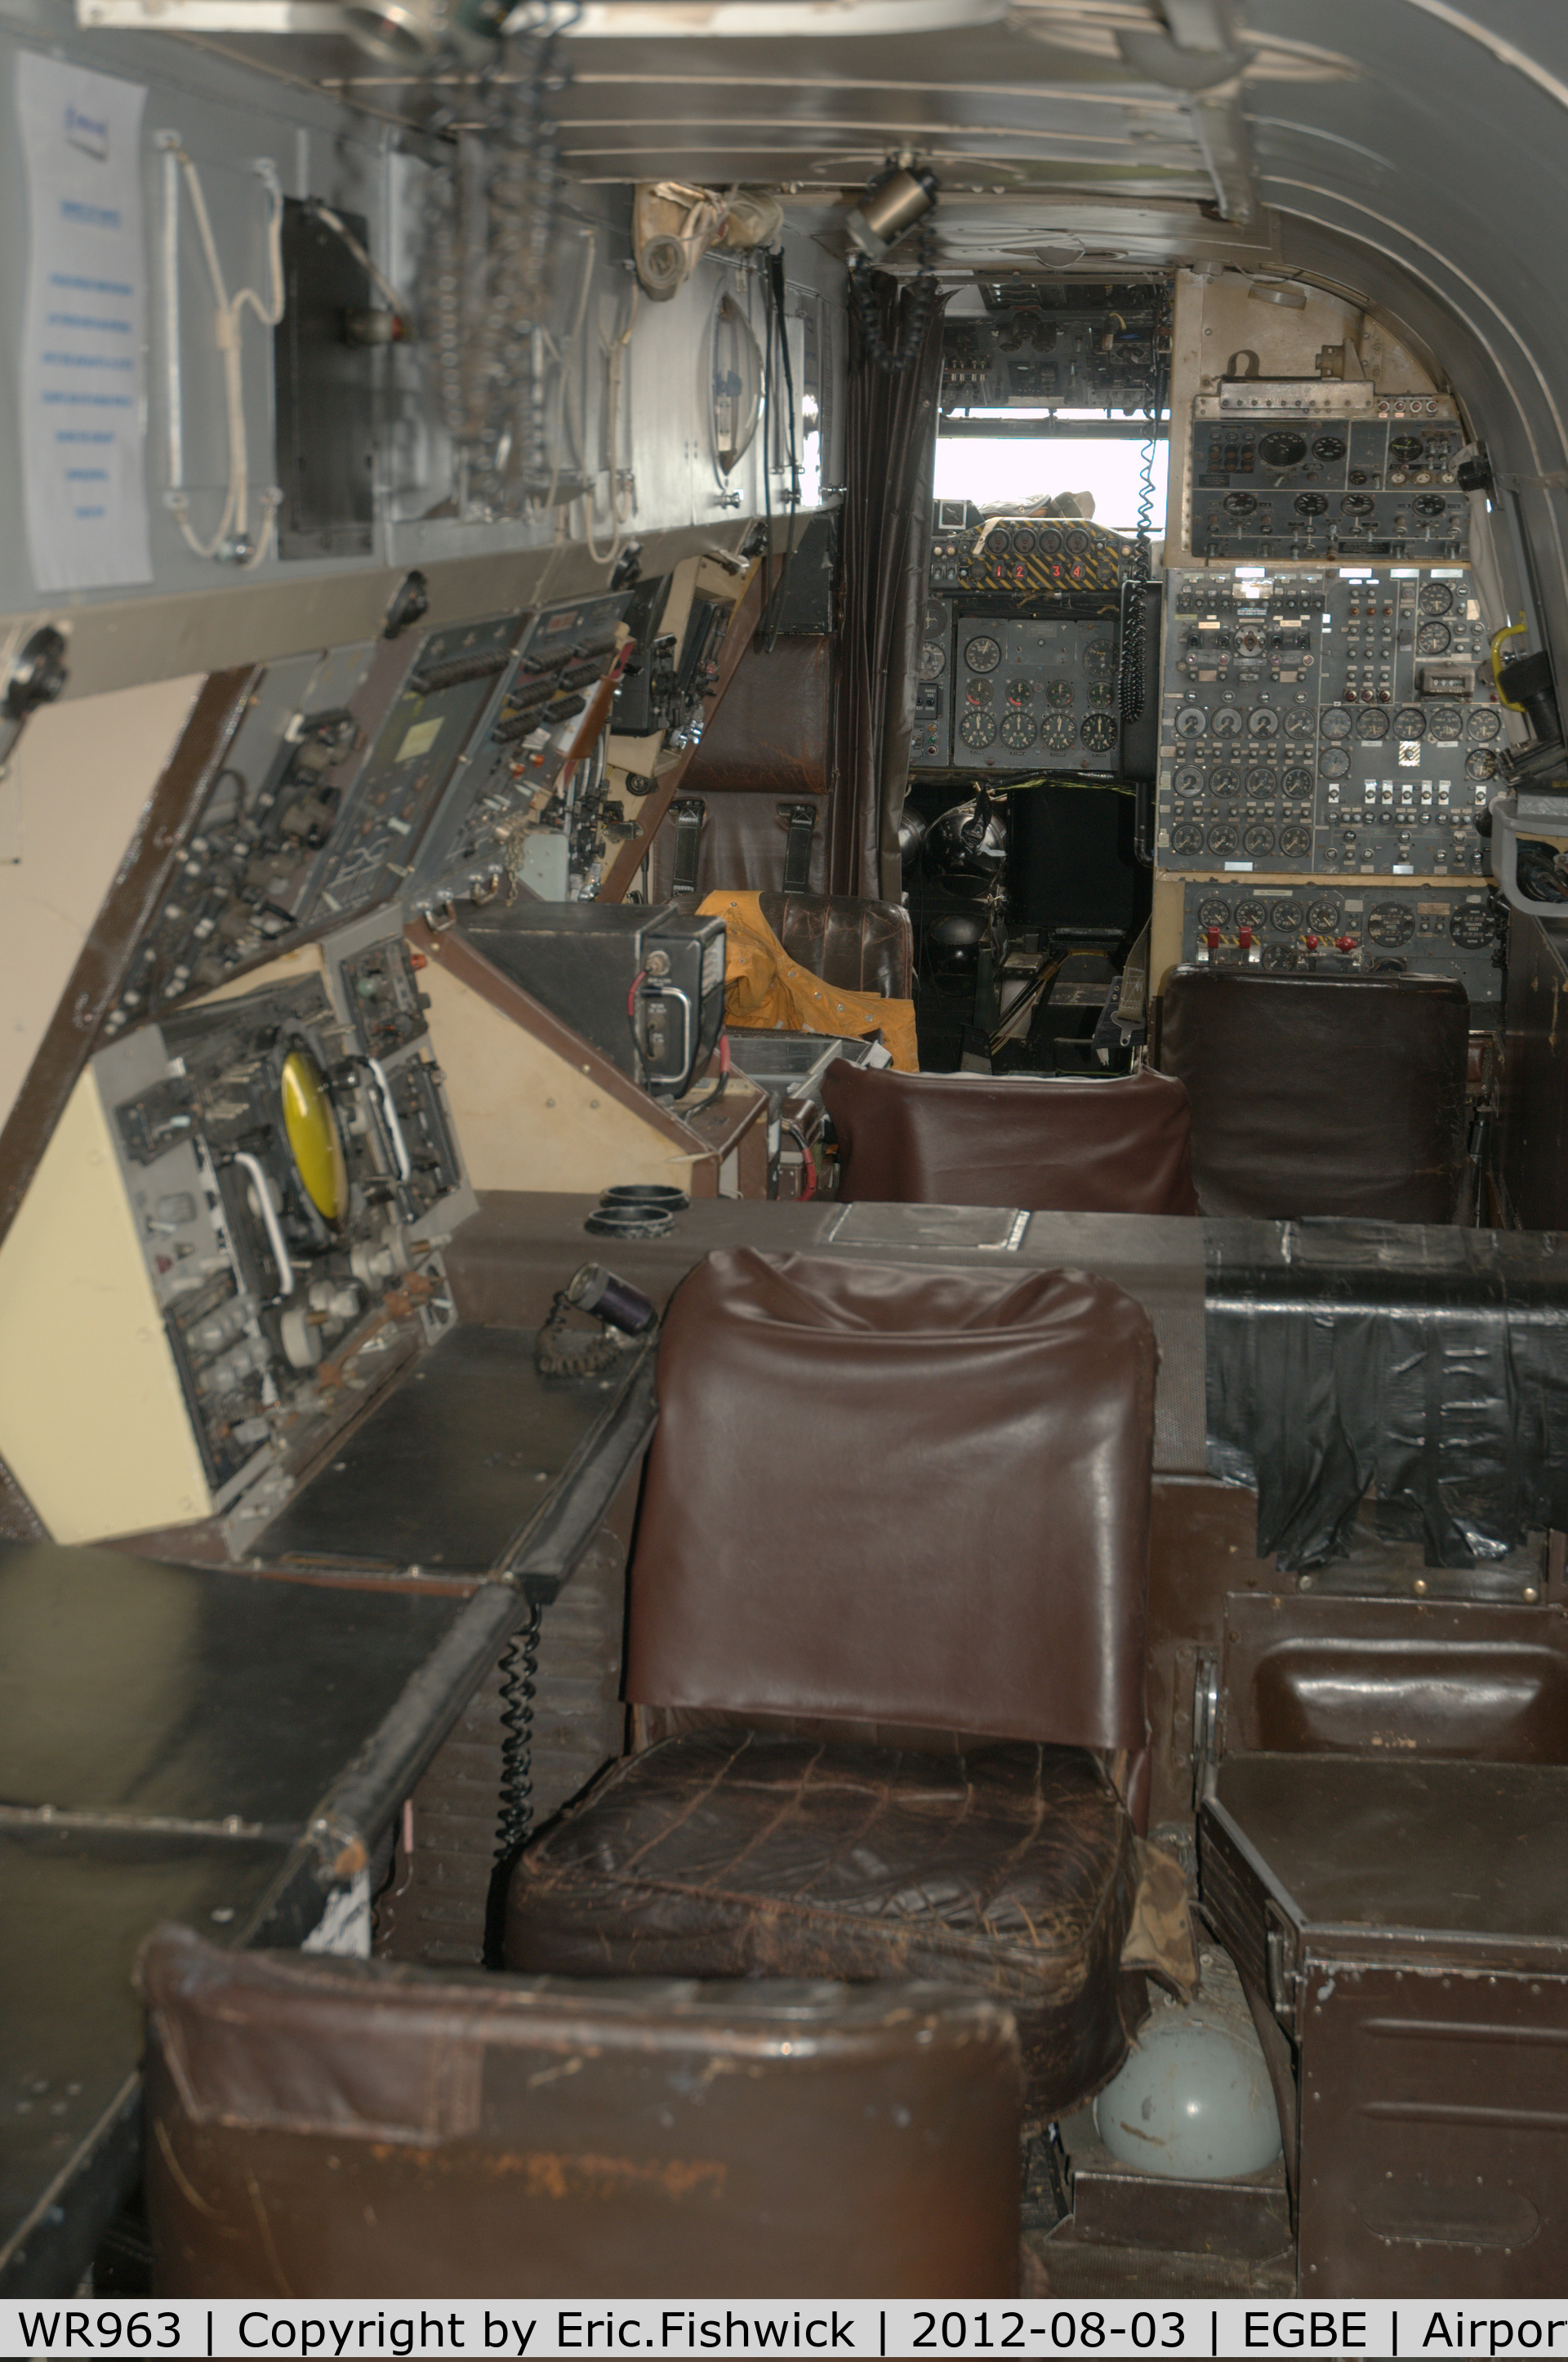 WR963, 1954 Avro 696 Shackleton AEW.2 C/N Not found WR963, 5. WR963 interior at Airbase, Coventry Airport West.